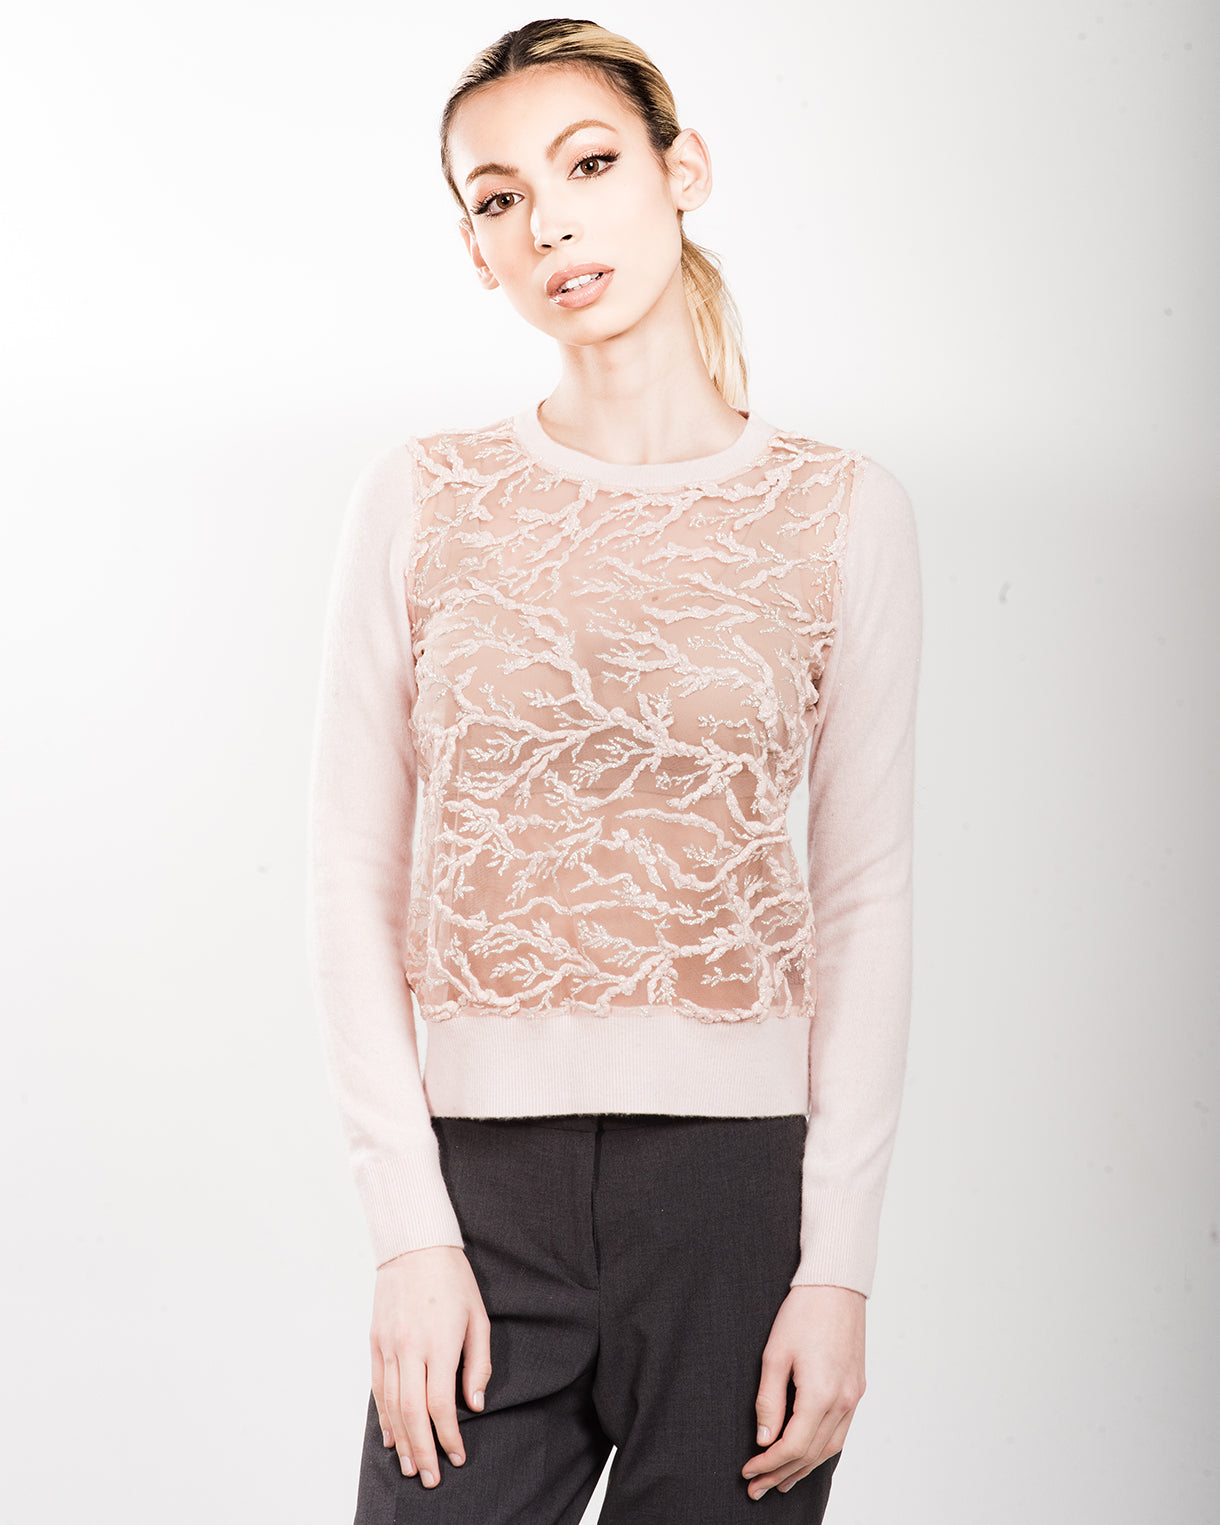 XS BLUSH LONG SLEEVE CREW NECK CASHMERE SWEATER WITH BLUSH COLORED CORAL AND ICY SPARKLE EMBROIDERED TULLE FRONT WITH TULLE LINING